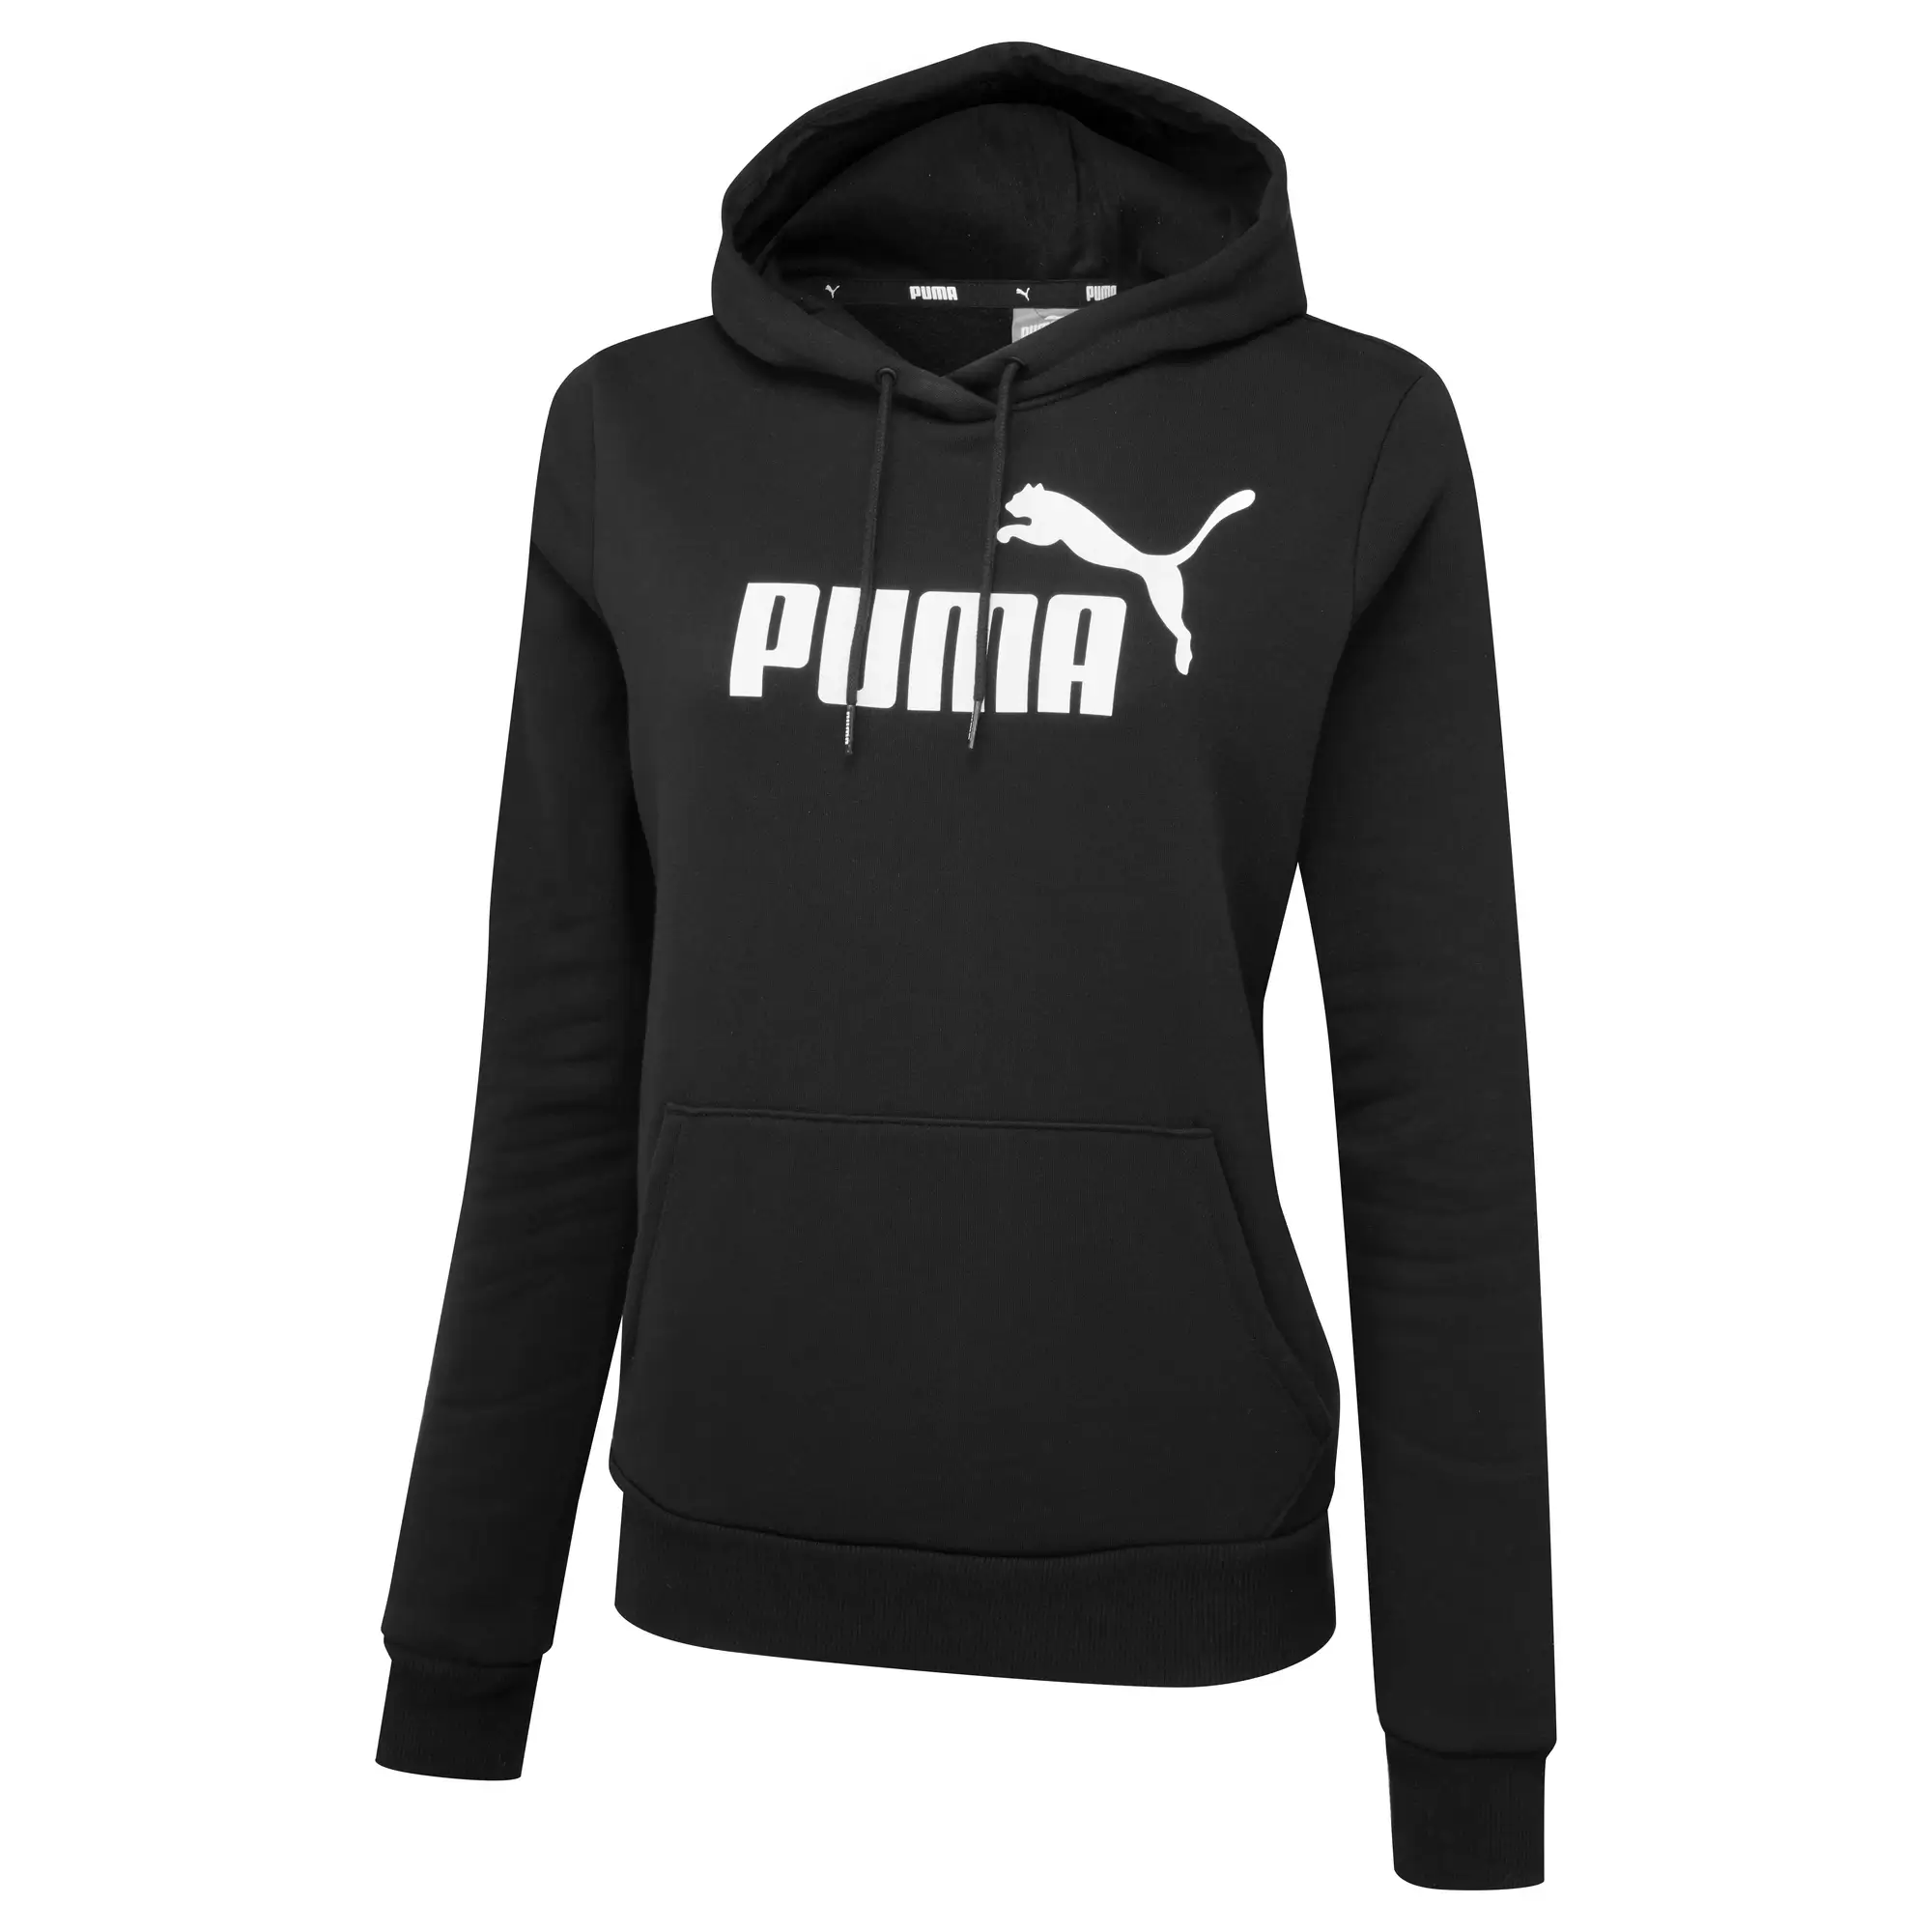 PUMA Essentials Logo Women's Hoodie - Recycled Discounts and Cashback